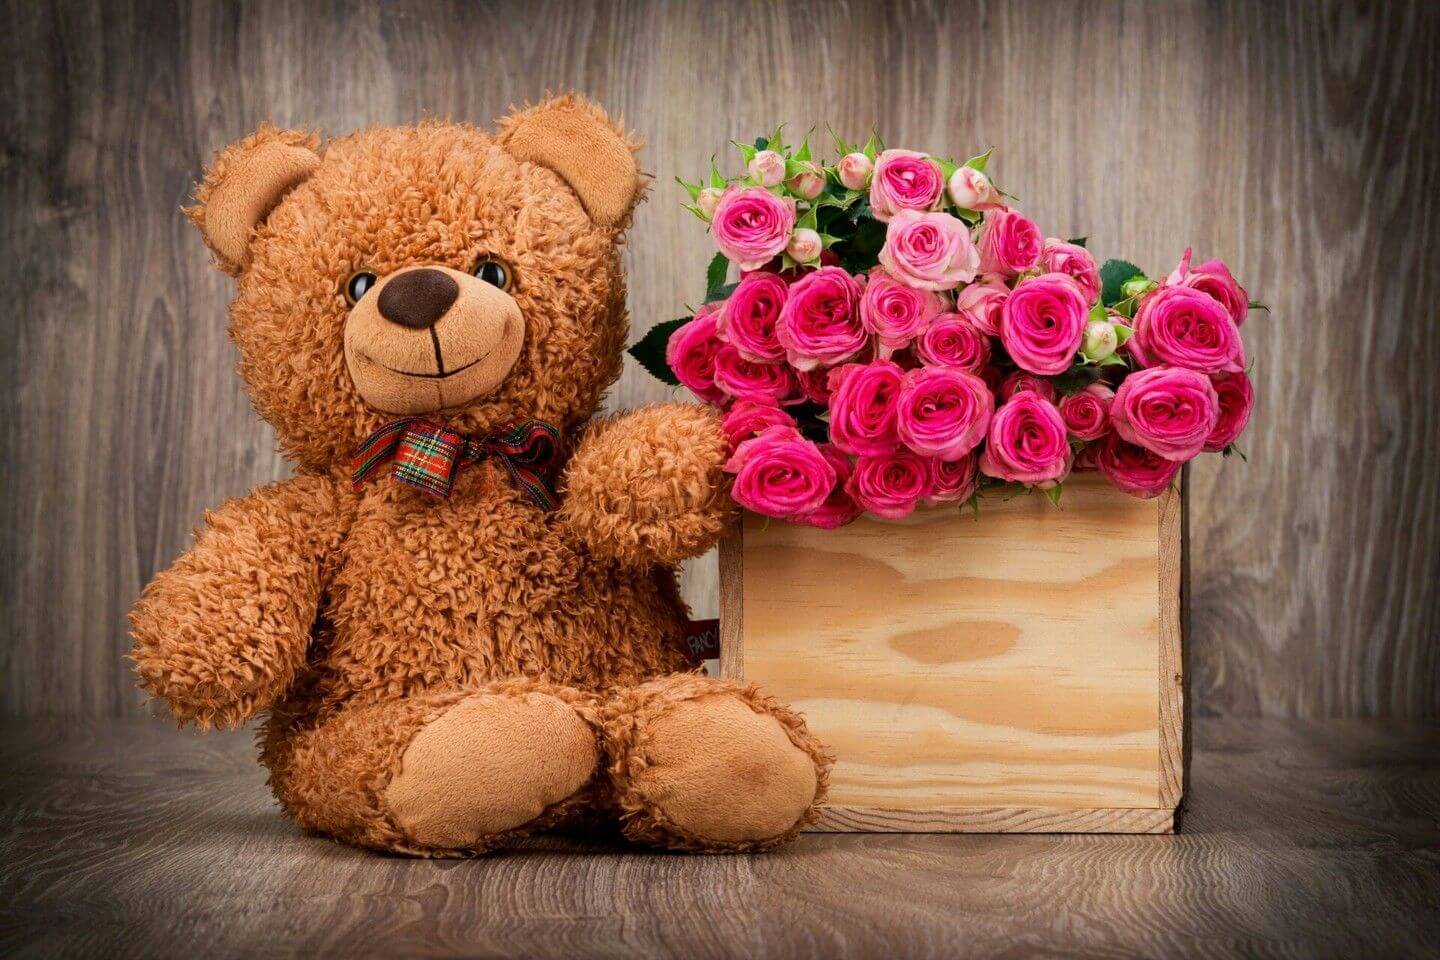 Morning Images With Teddy Bear - Teddy Bear Pic 4k , HD Wallpaper & Backgrounds